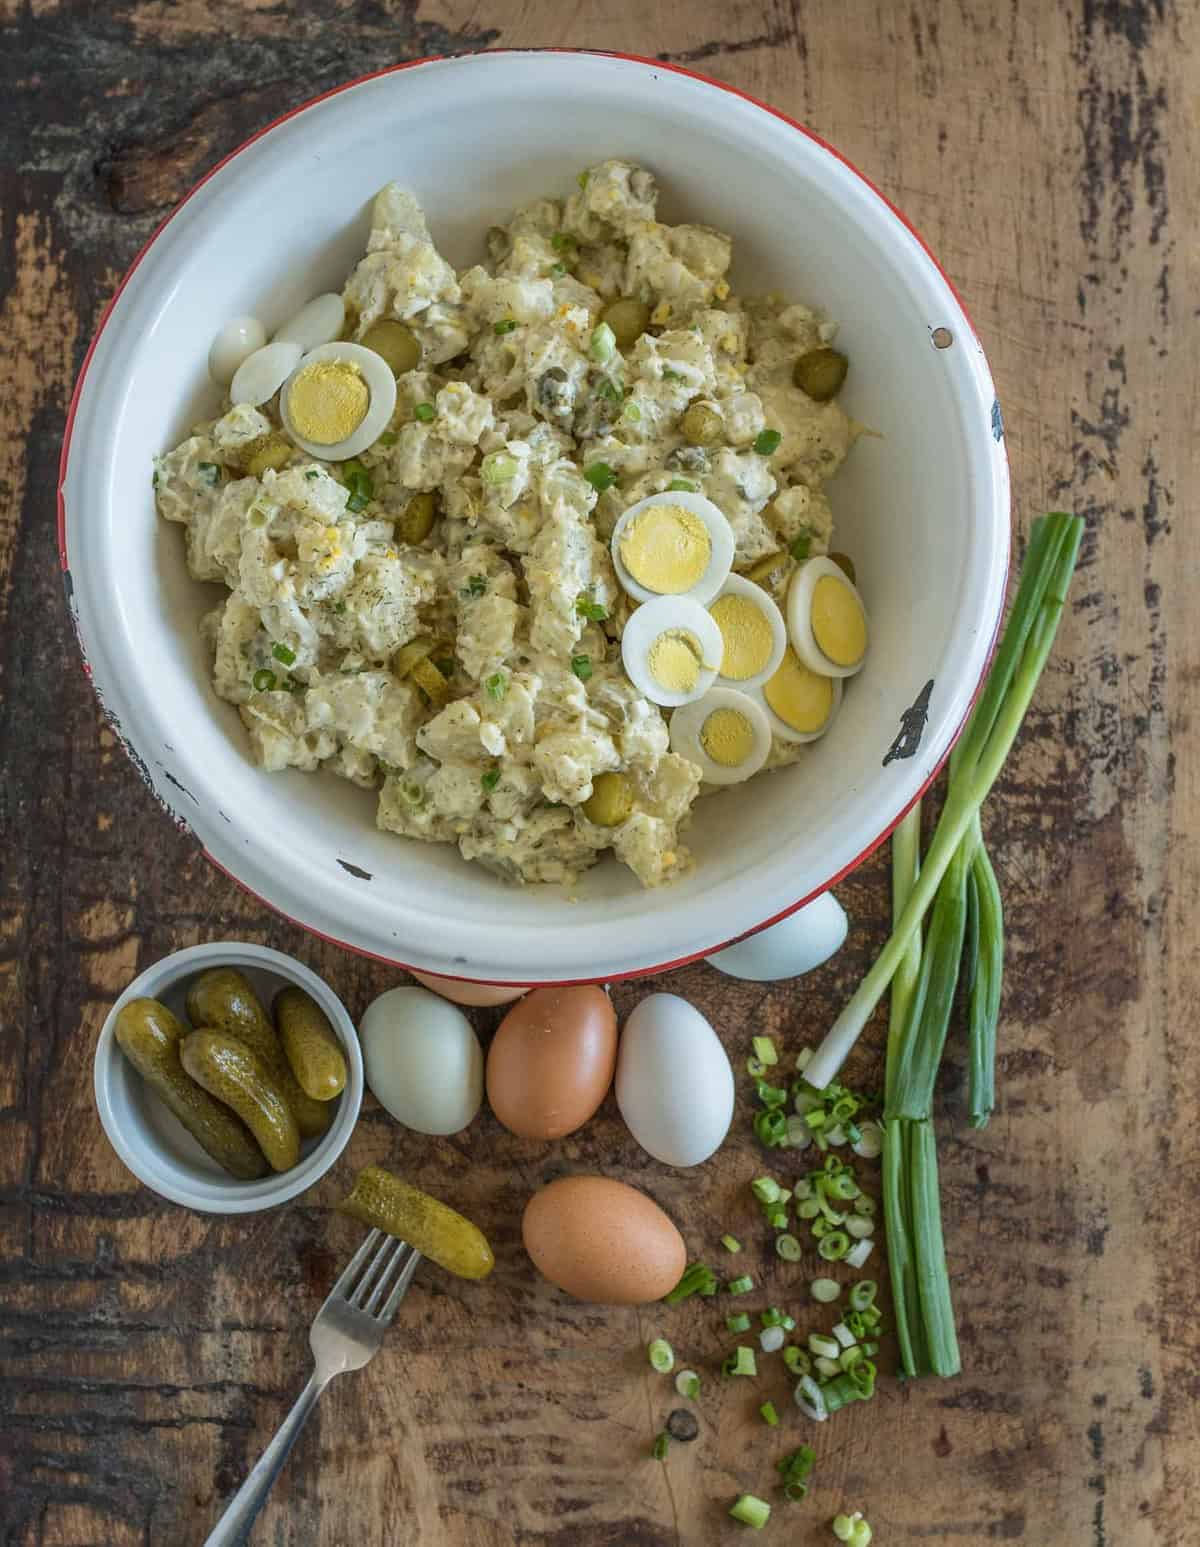 Instant Pot Potato Salad that only has a 5 minute cook time and you cook the eggs right along with the potatoes, plus there's a secret ingredient.